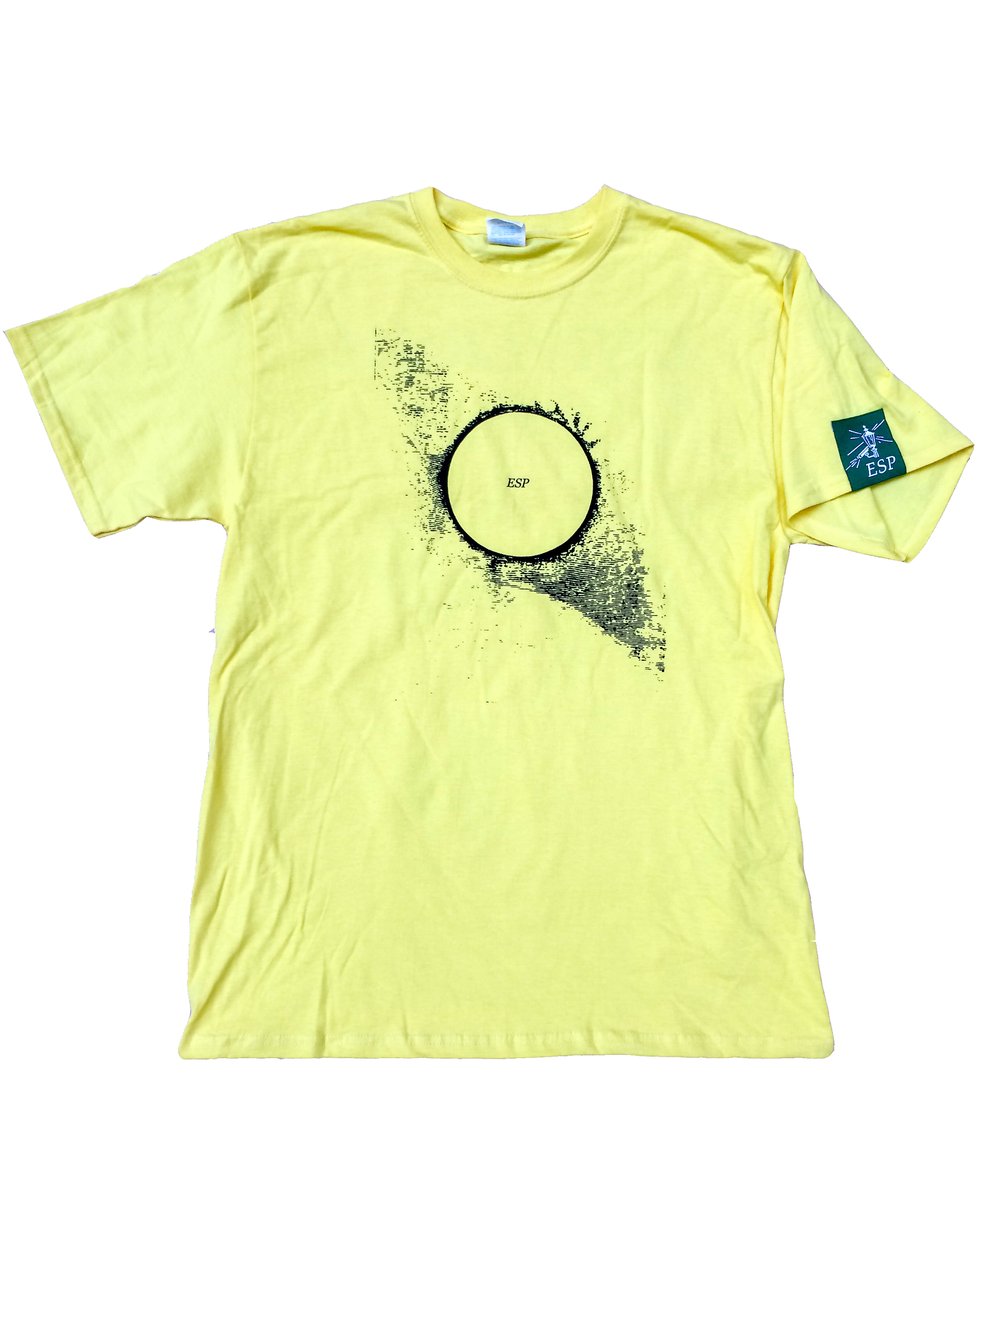 Image of East Side Powerviolence 'Universal Laws' S/S T-Shirt (Daffodil)